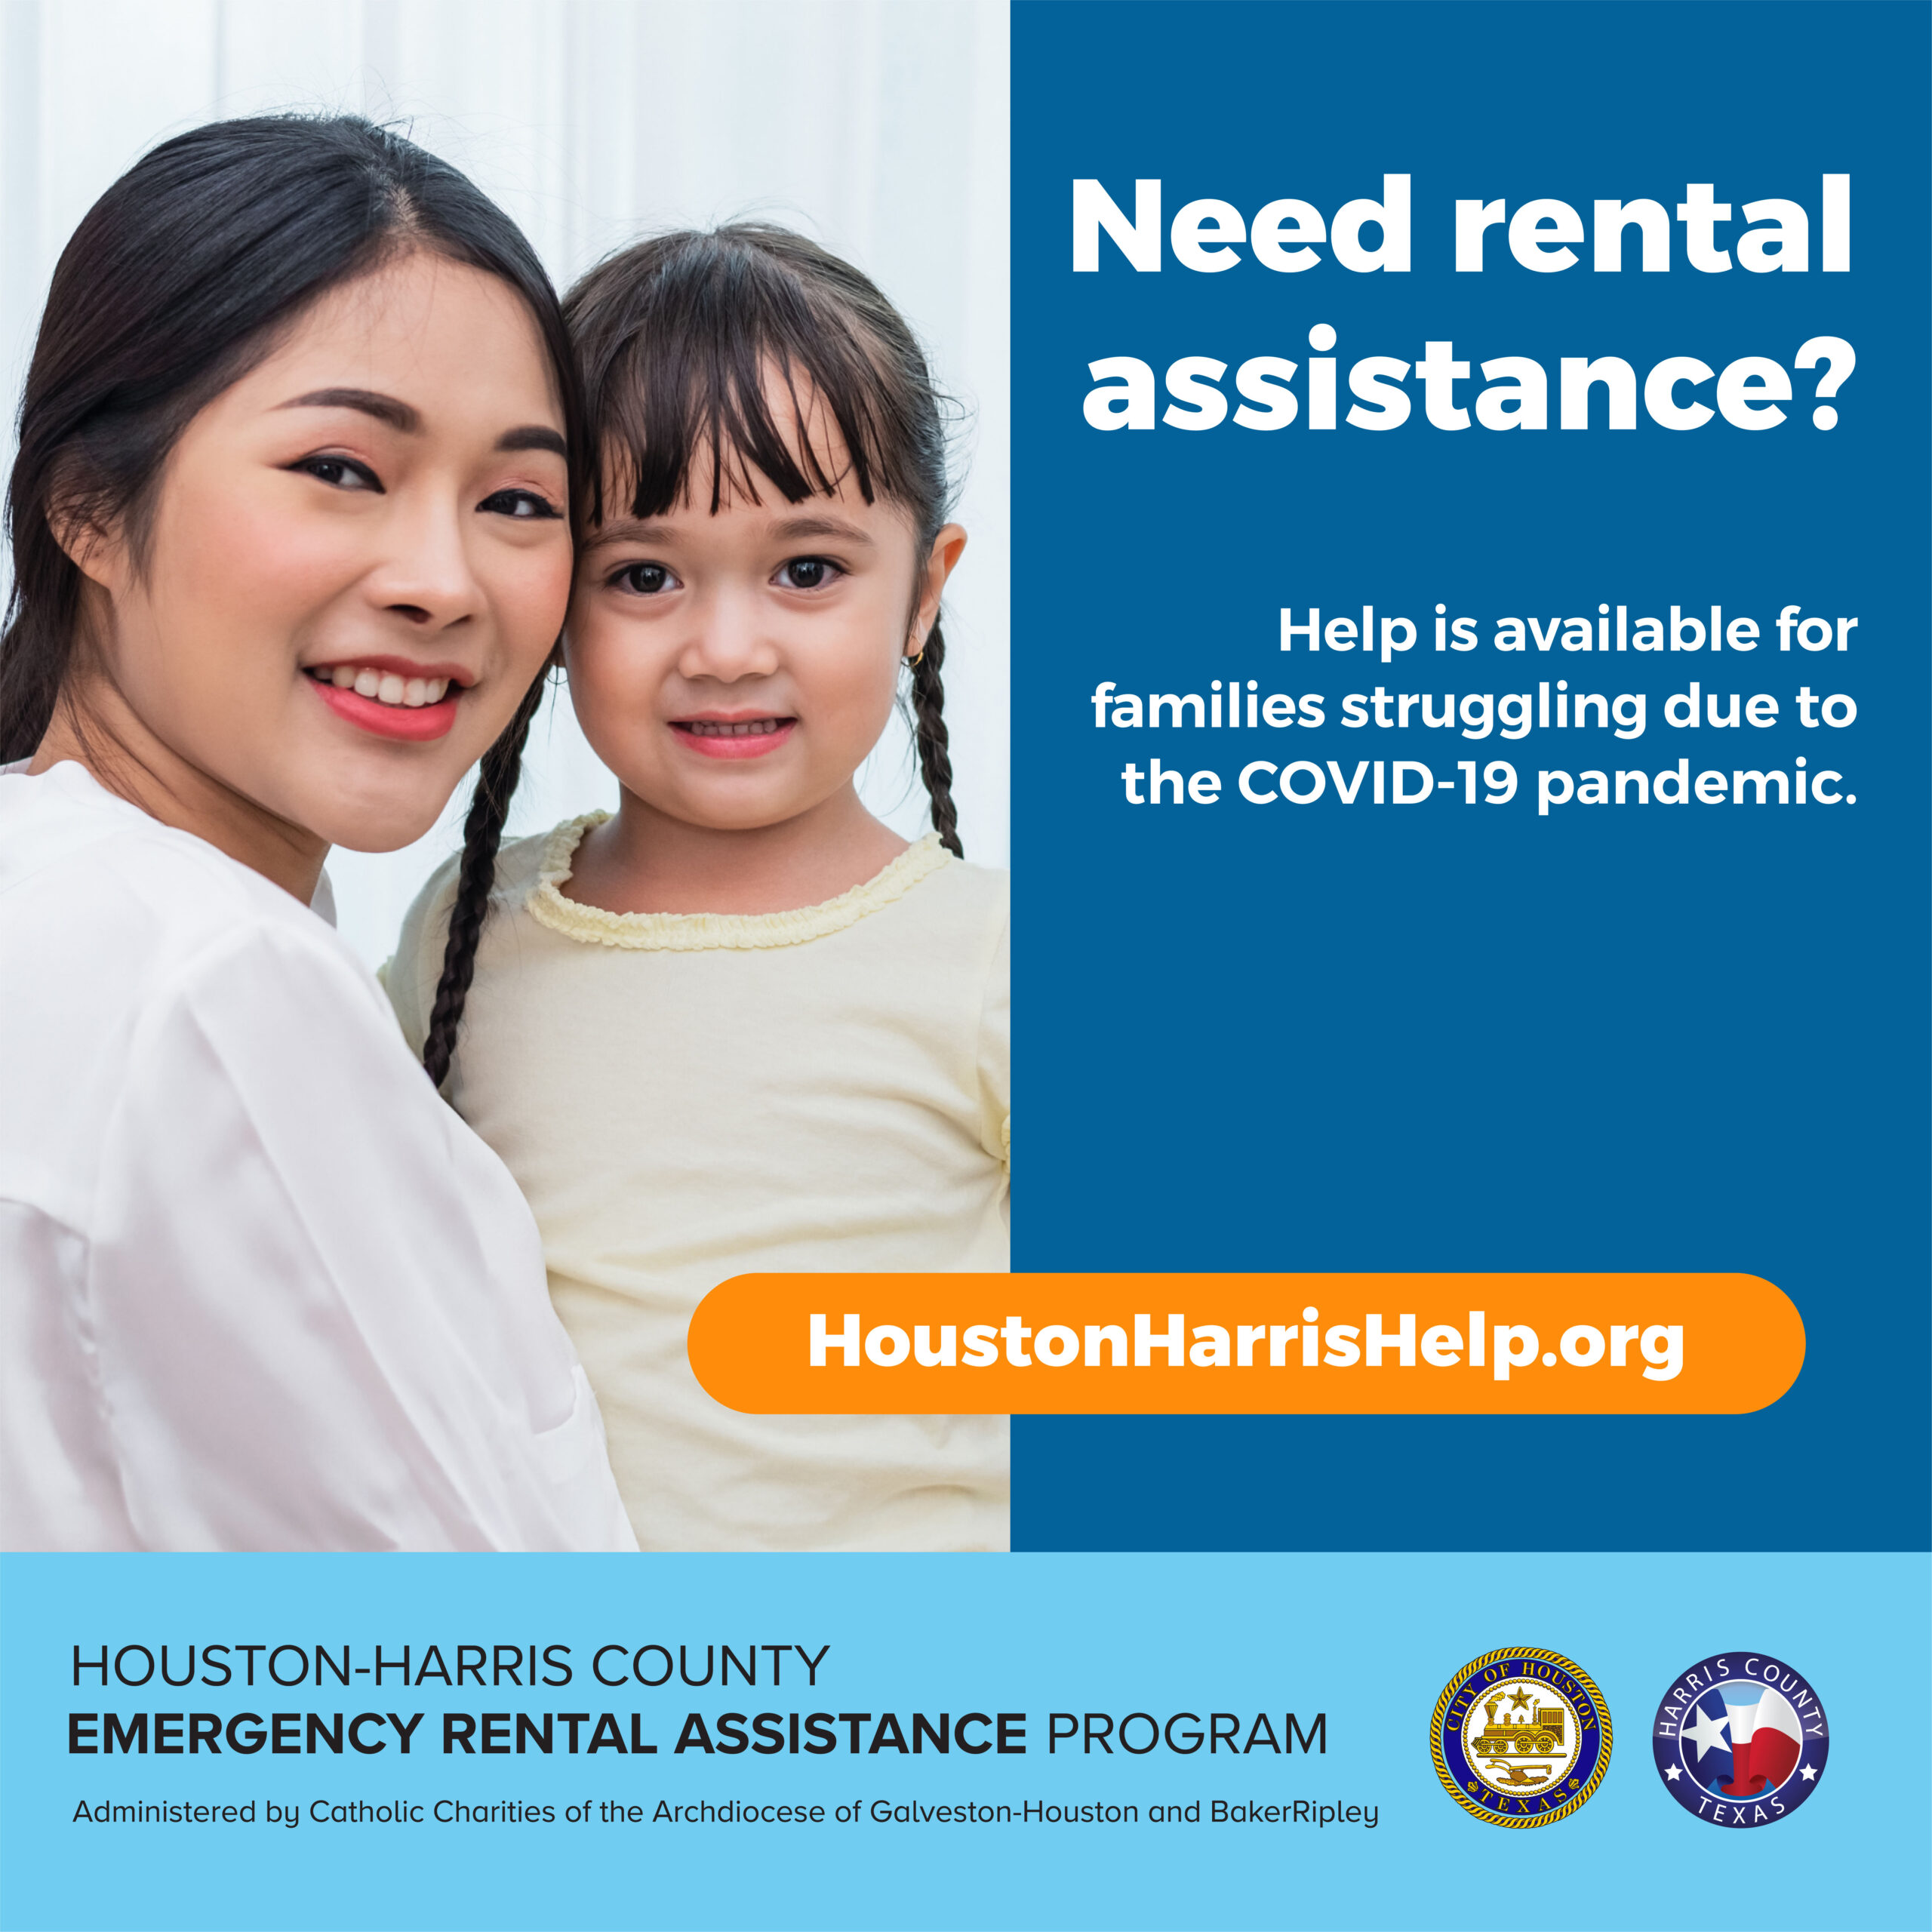 Need rental assistance? Apply online starting Feb. 25.